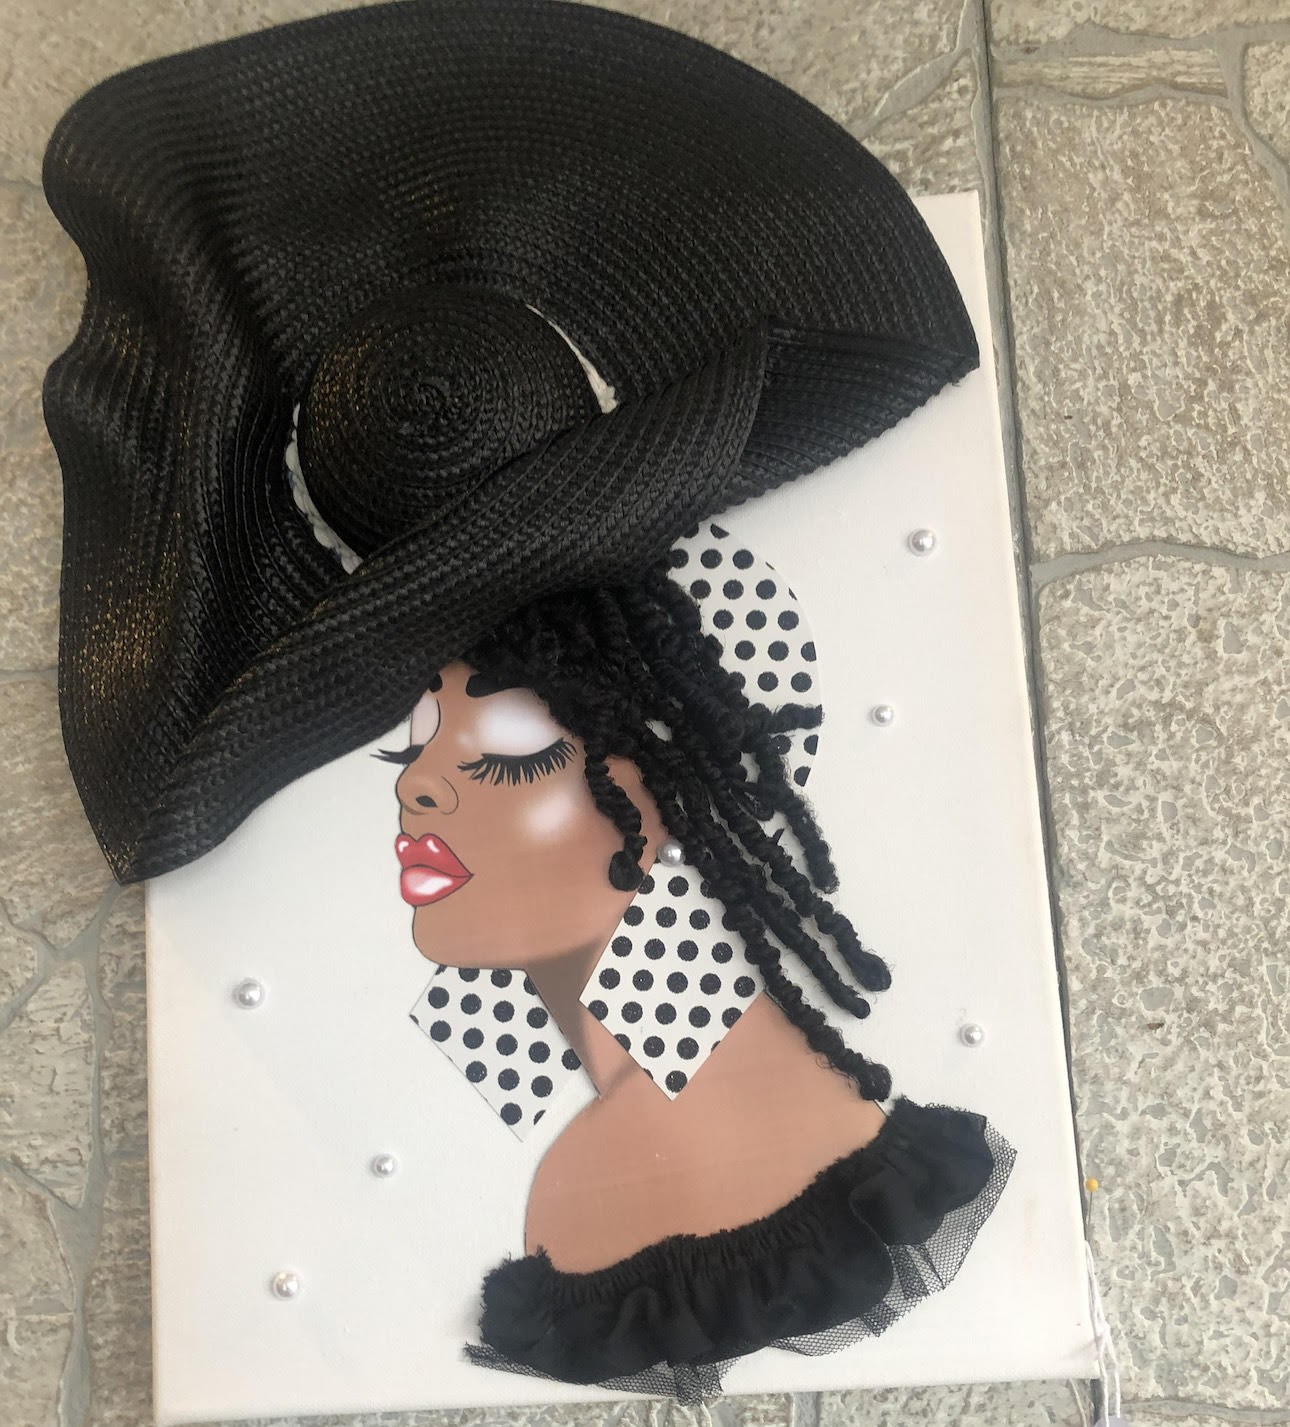 A handmade greeting card with a Black woman wearing a large black hat. 